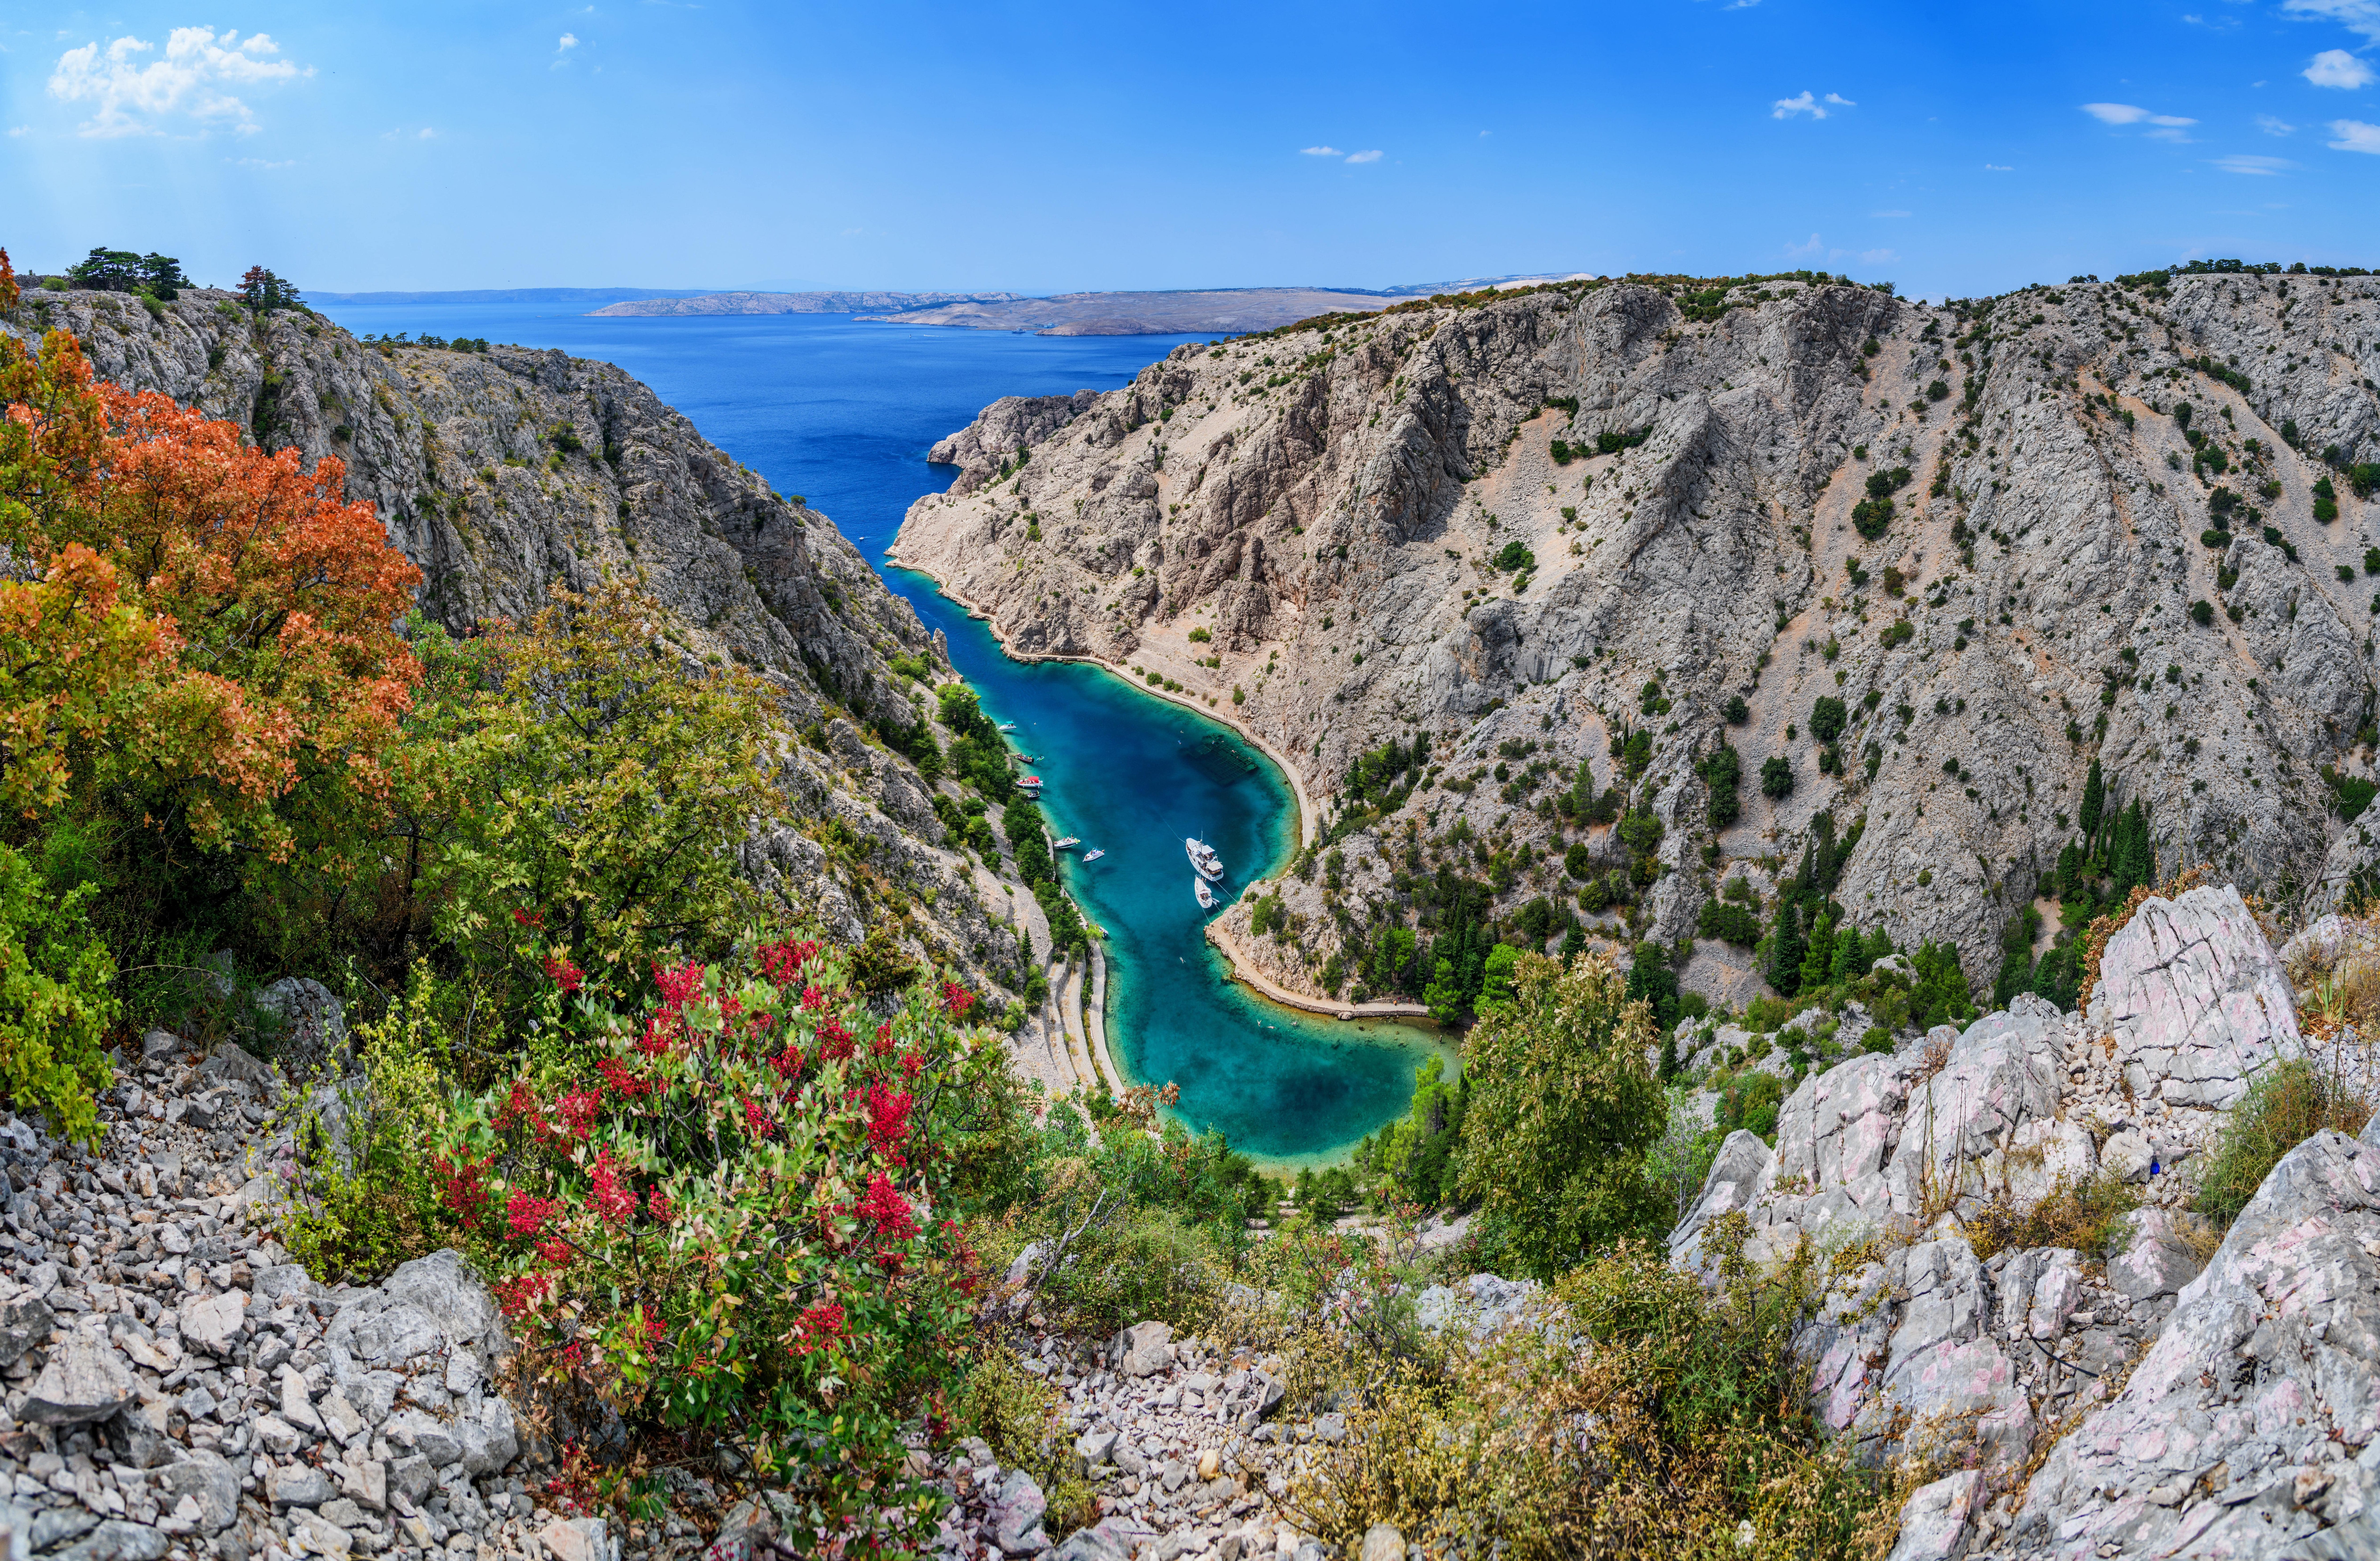 Explore the natural wonderland of raw beauty that lies in Croatia’s peaks, coasts and national parks